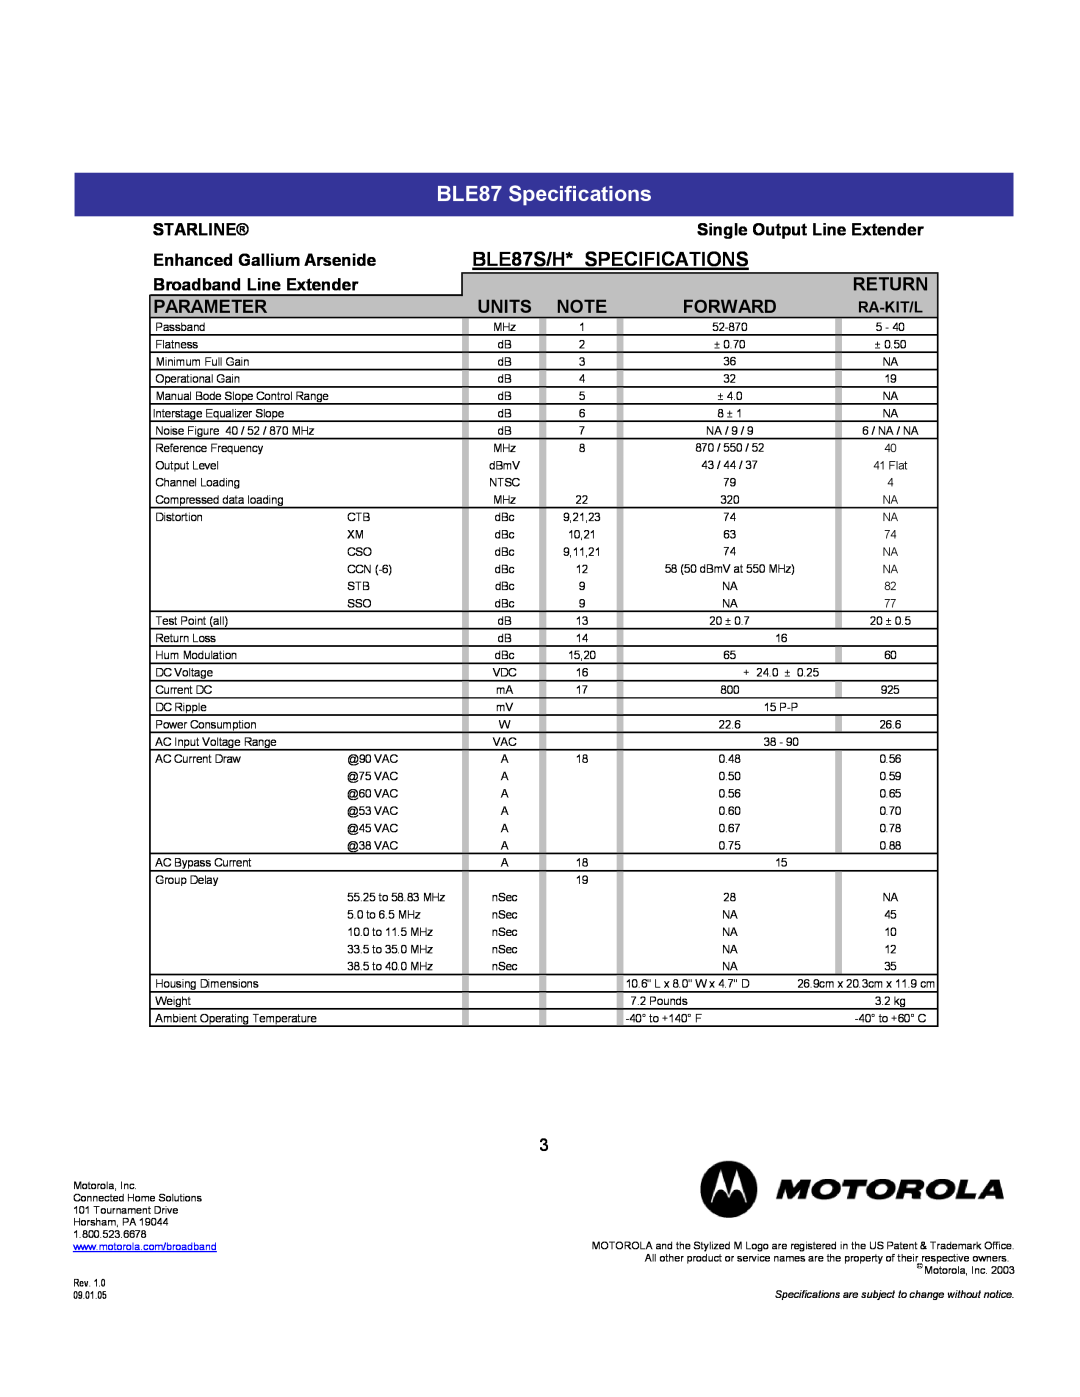 Motorola BLE87 Specifications, BLE87S/H* SPECIFICATIONS, Parameter, Starline, Single Output Line Extender, Units 